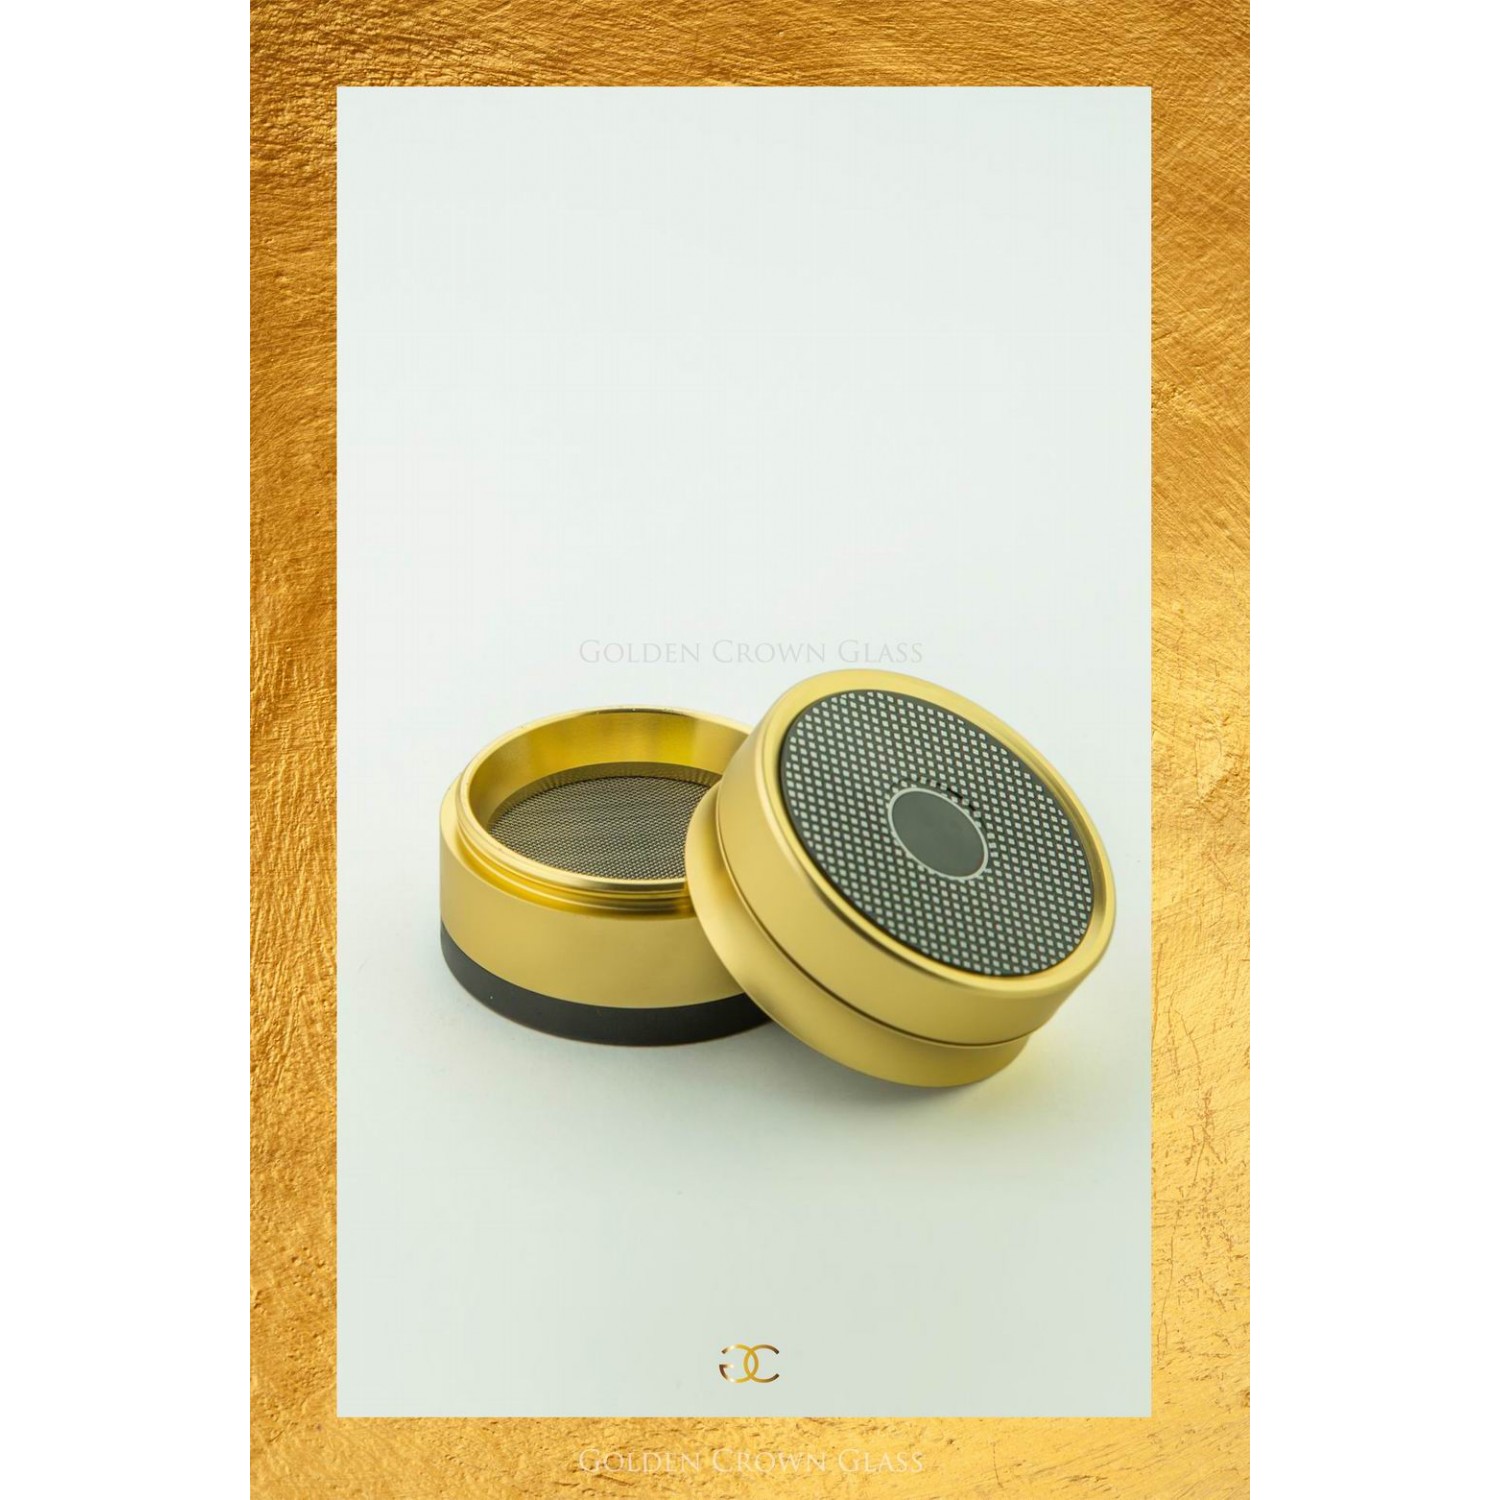 Loaded Gold Grinders by GOLDEN CROWN